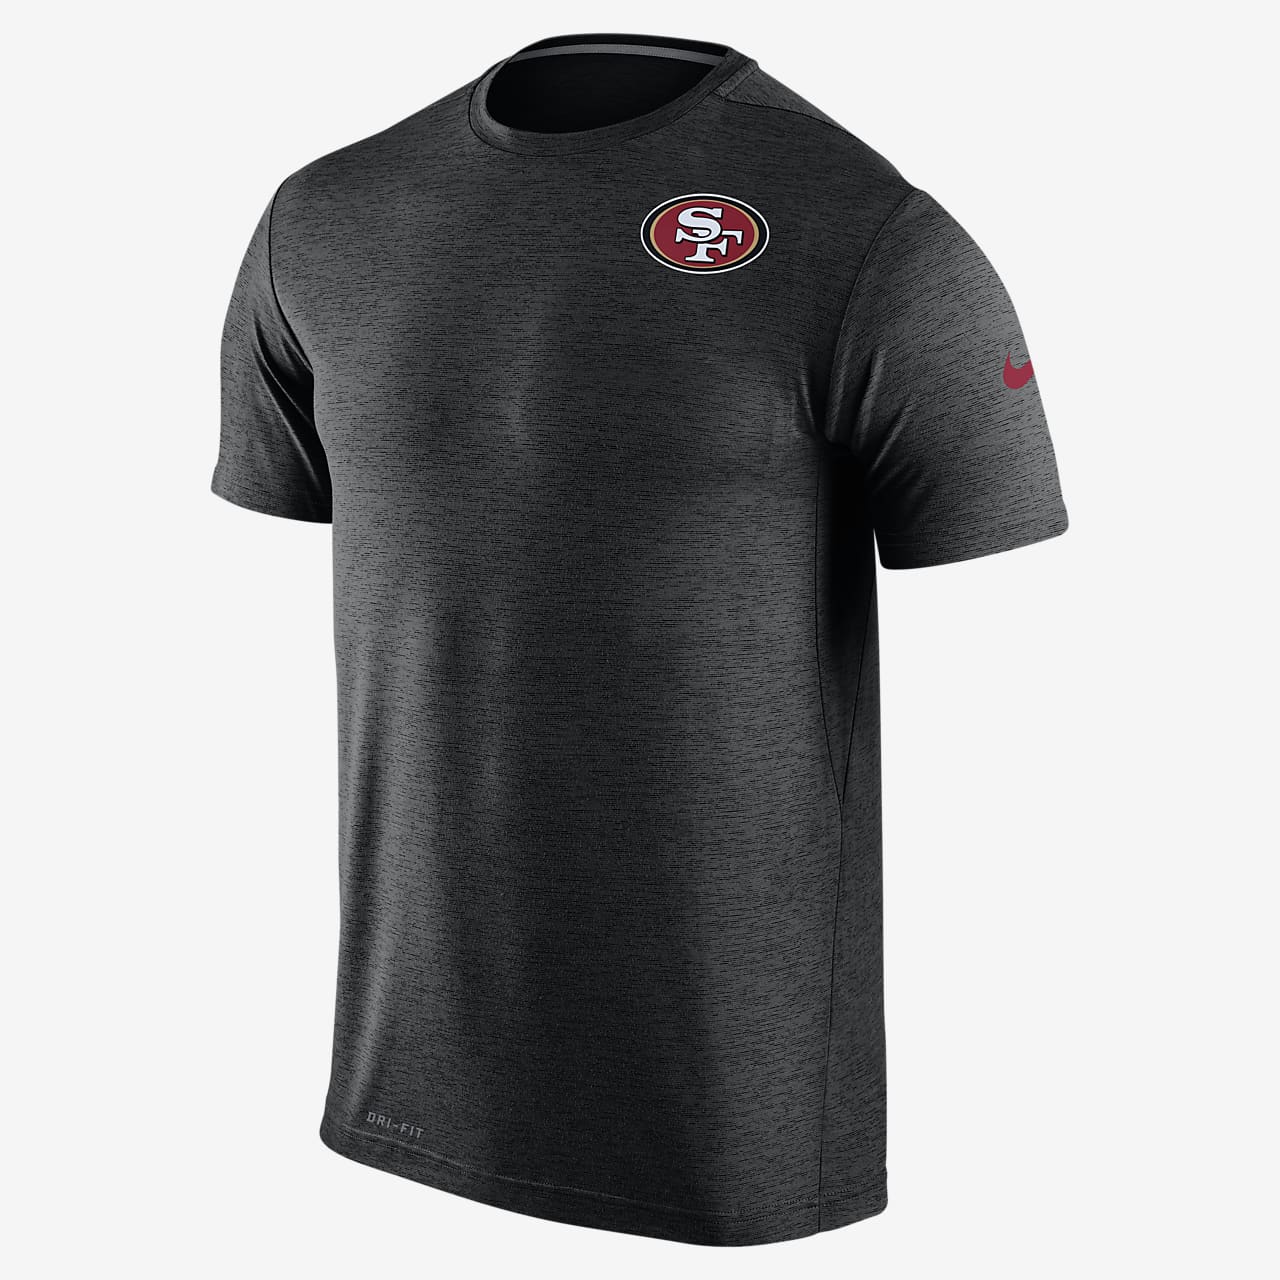 Nike Dri-FIT Touch (NFL 49ers) Men's 